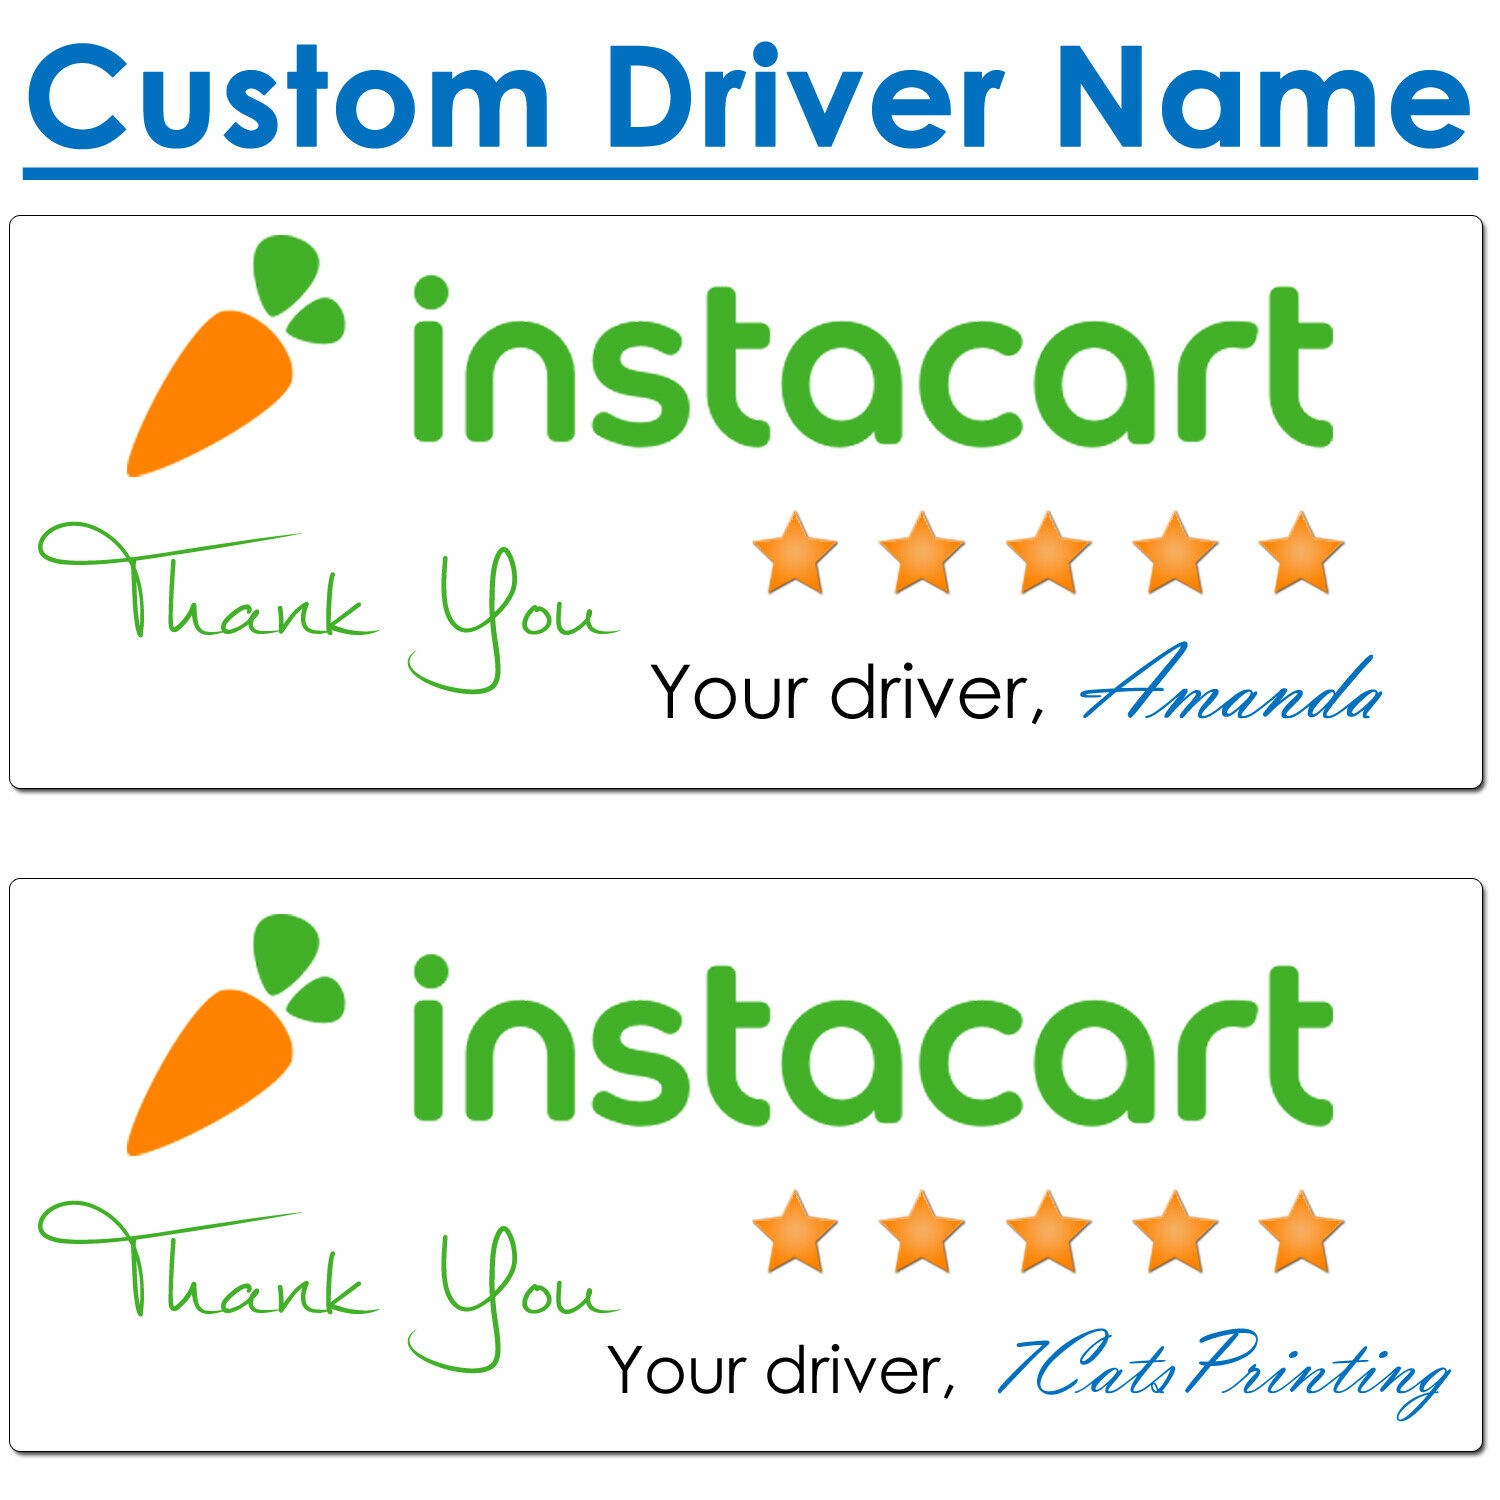 30 For Instacart Delivery Thank You Stickers For Drivers Rating Custom Name